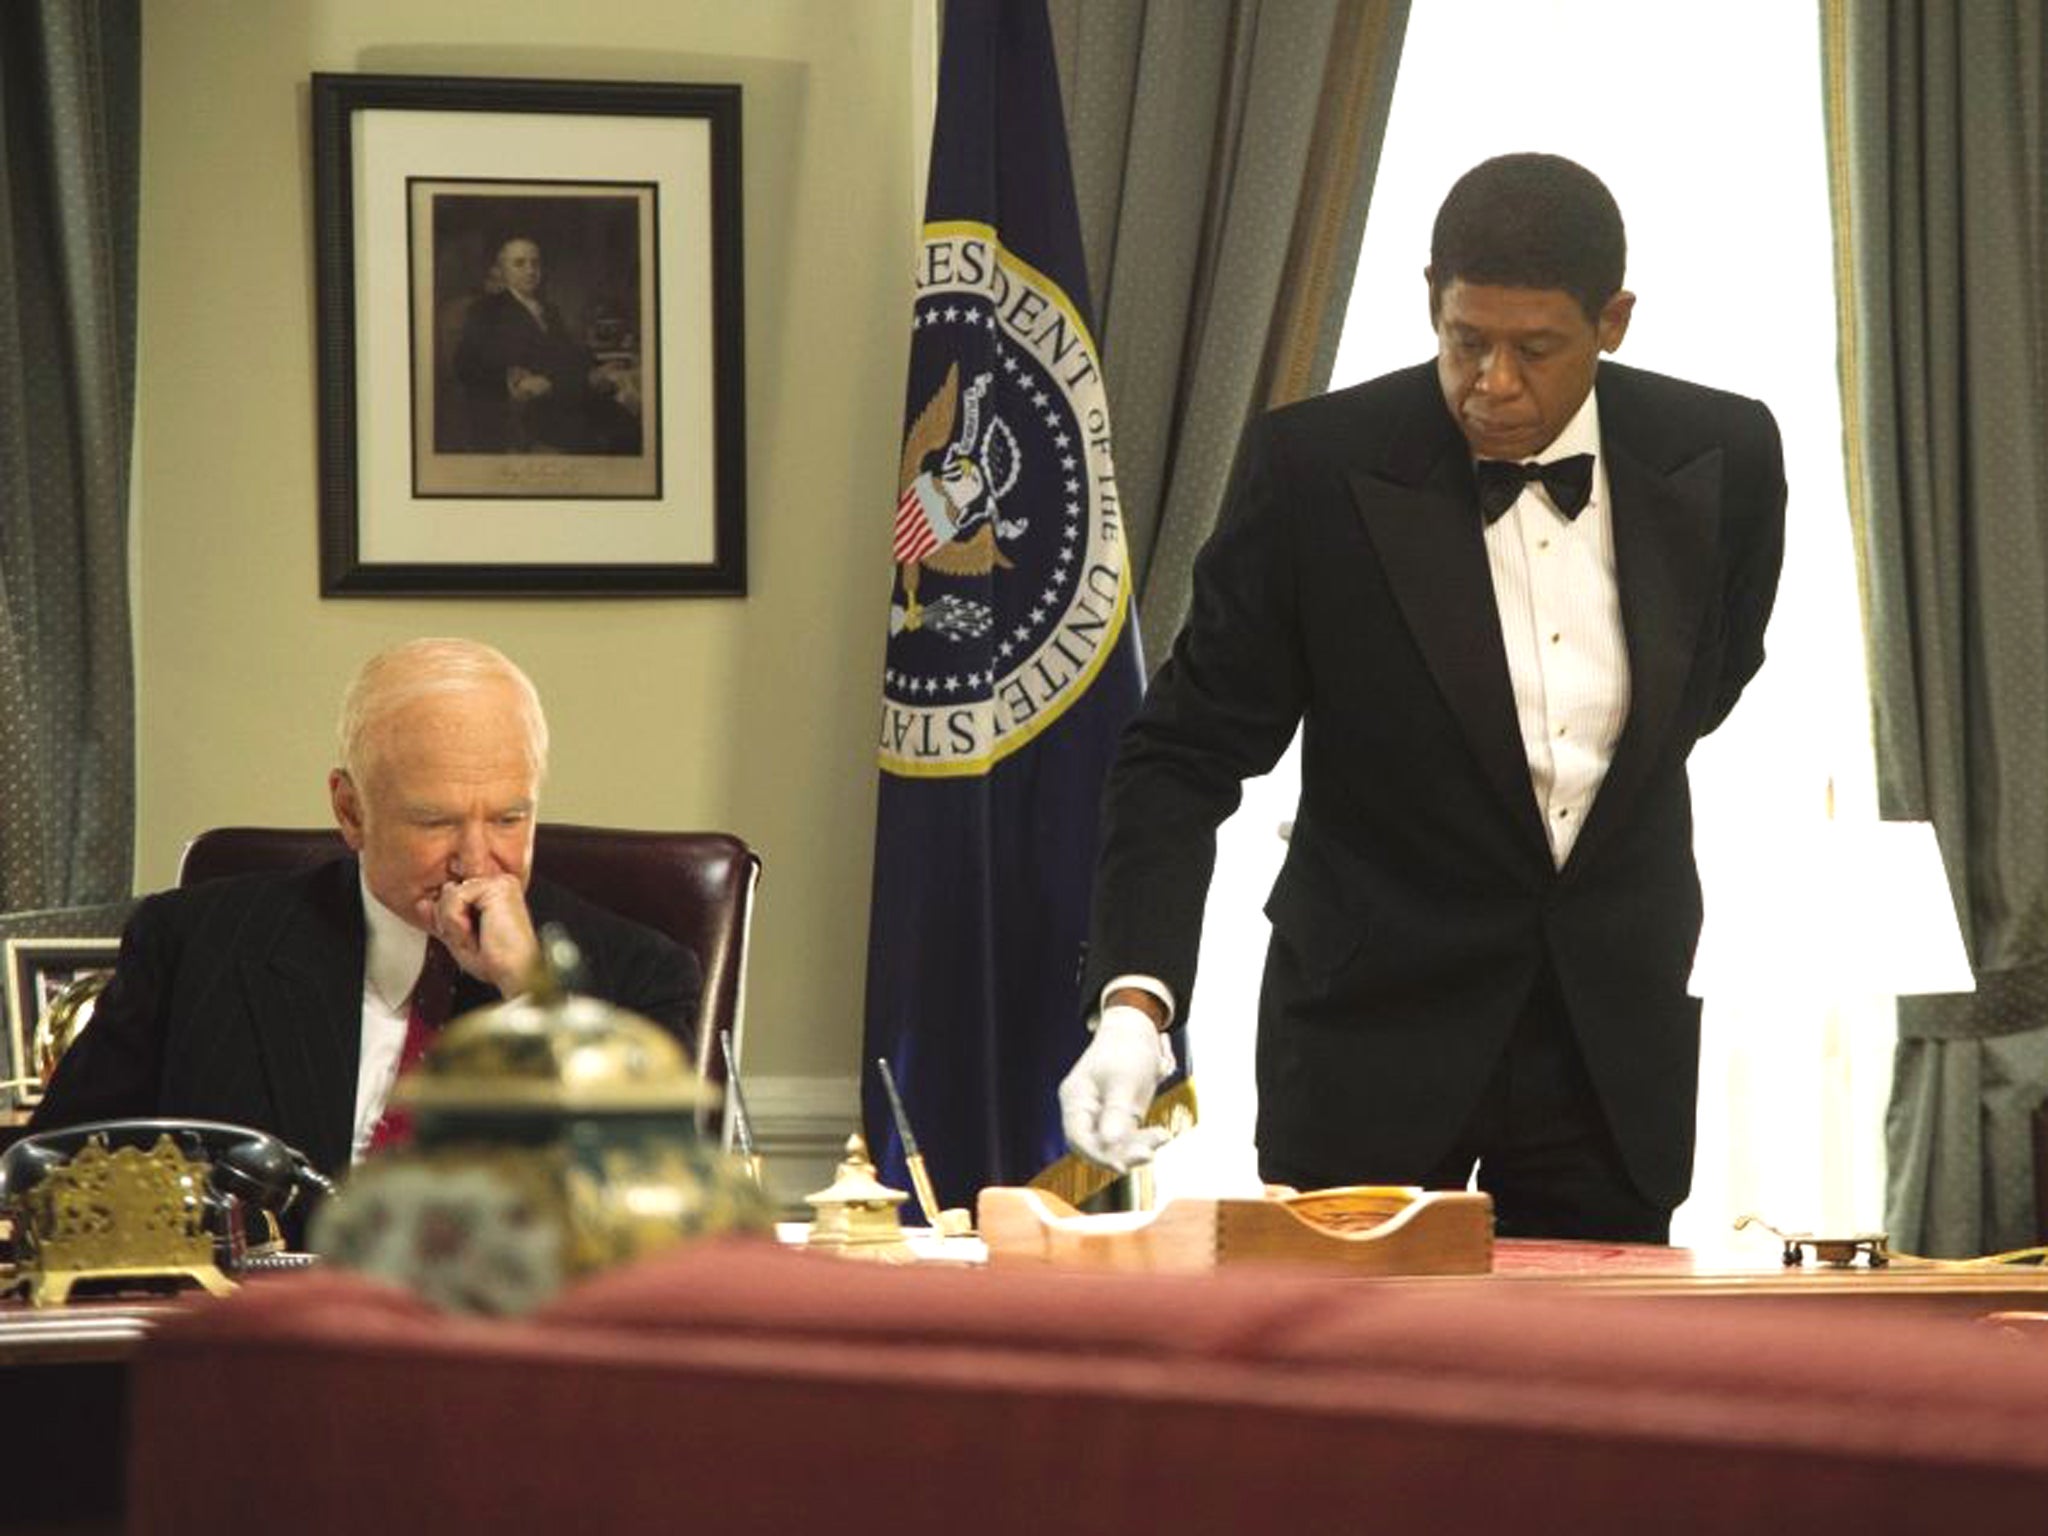 The Butler is one of a number of films exploring America's relationship with race